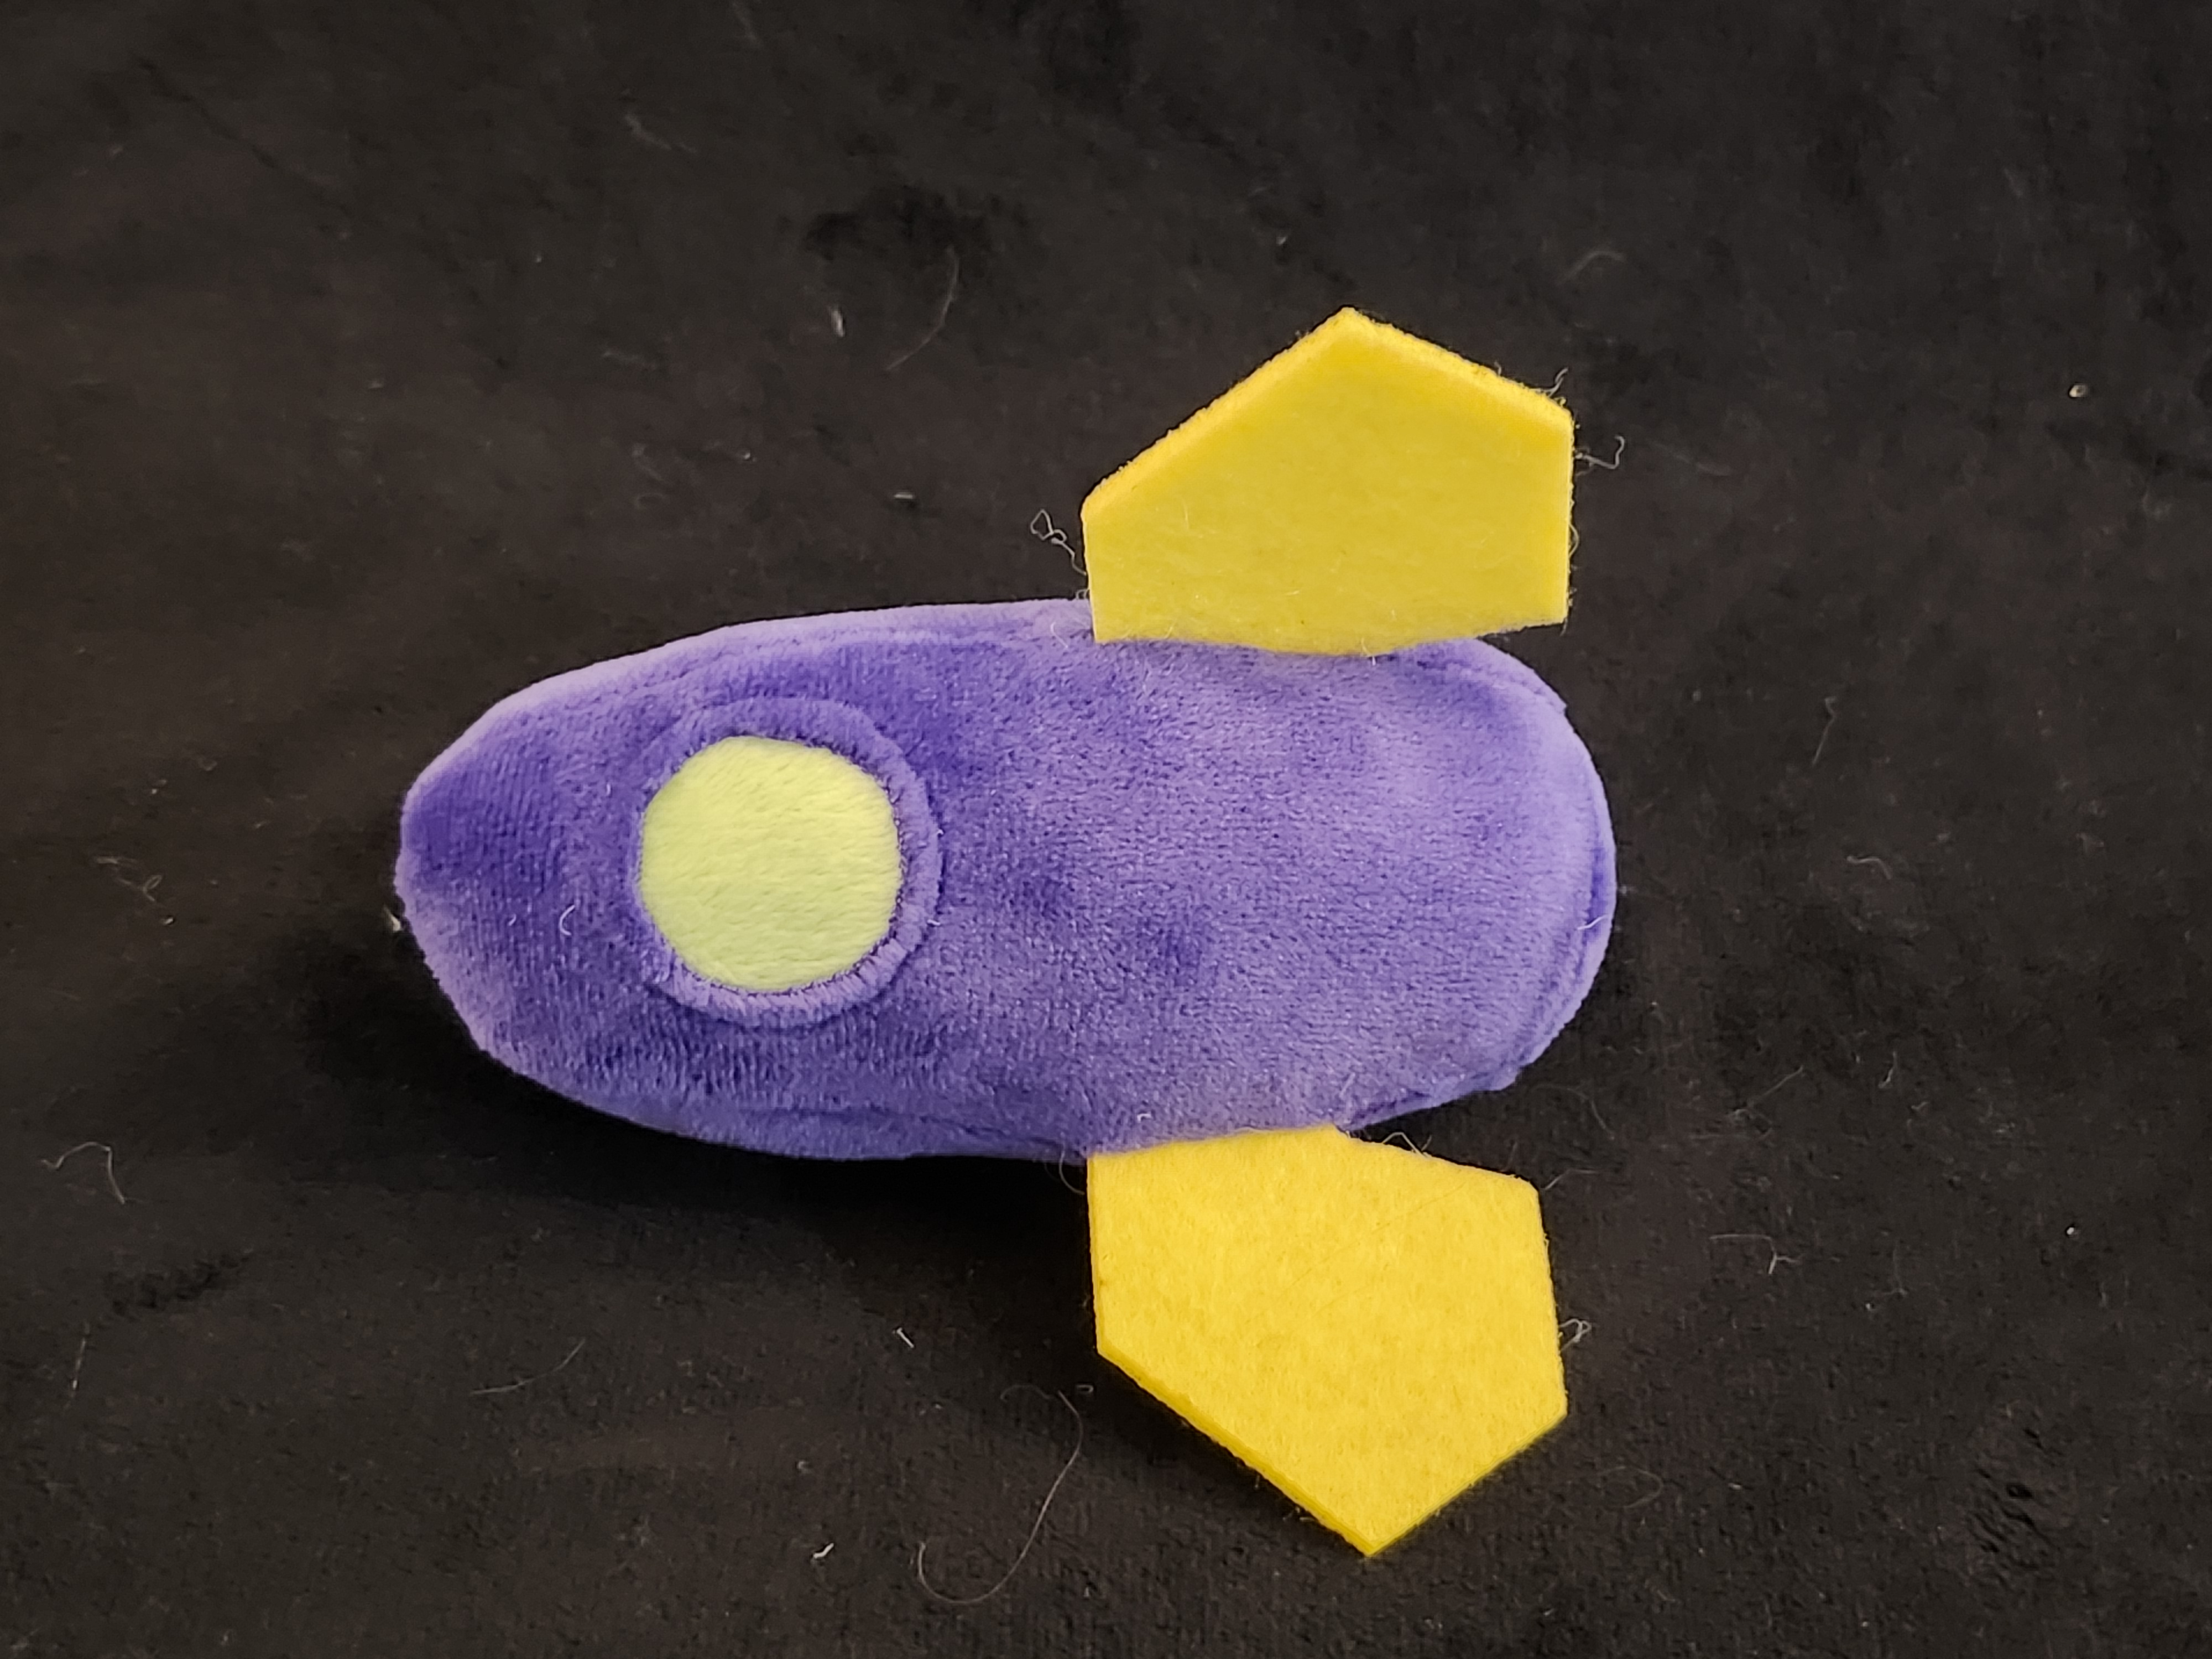 Small purple rocket with yellow fins.